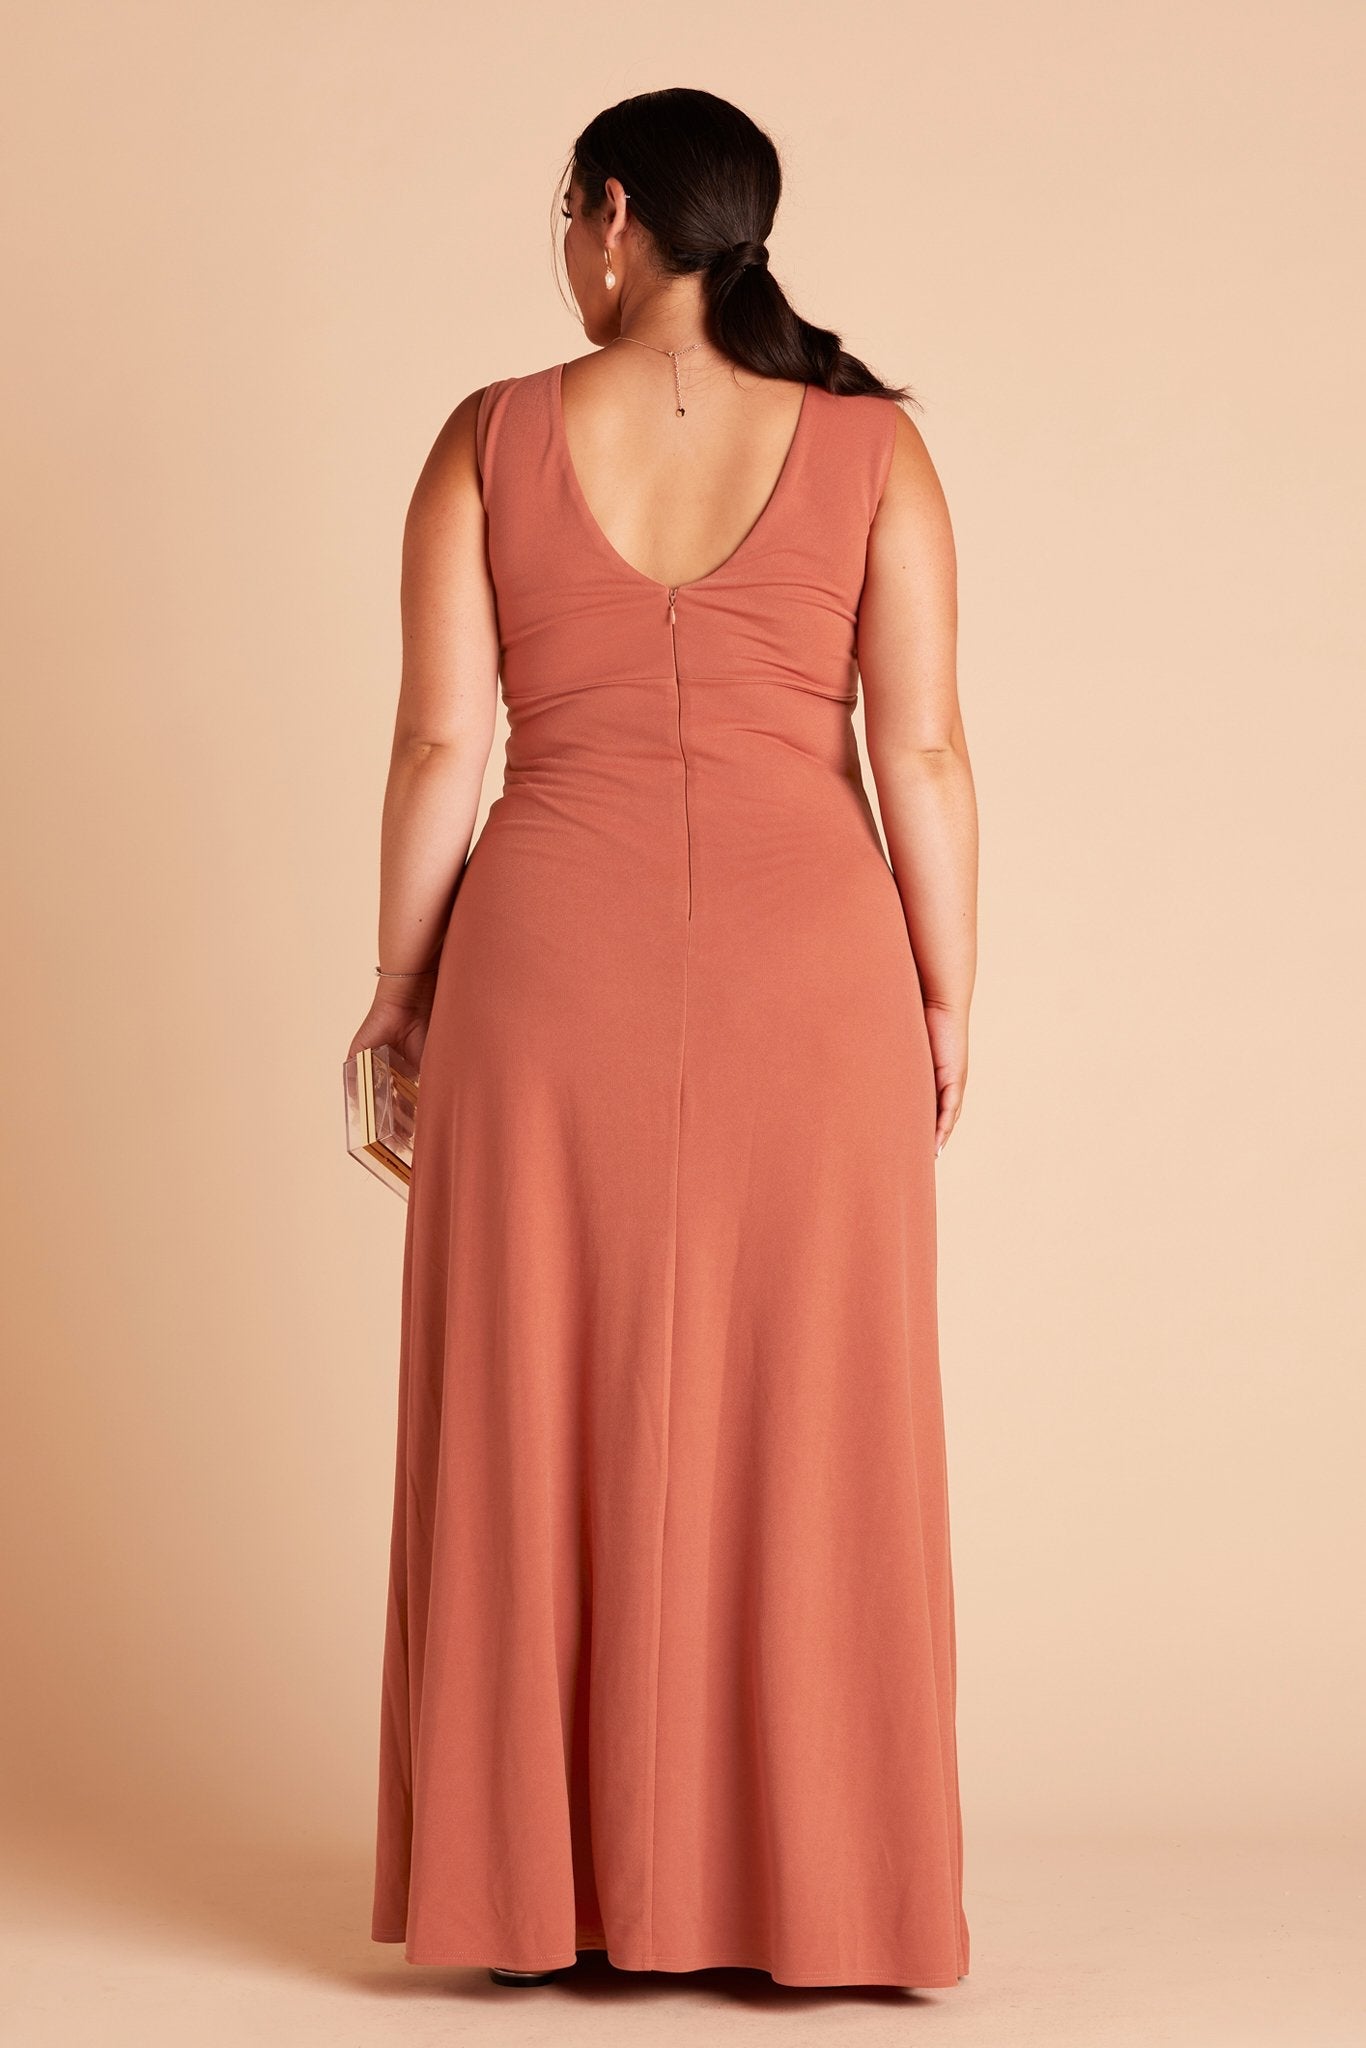 Shamin plus size bridesmaid dress in terracotta crepe by Birdy Grey, back view